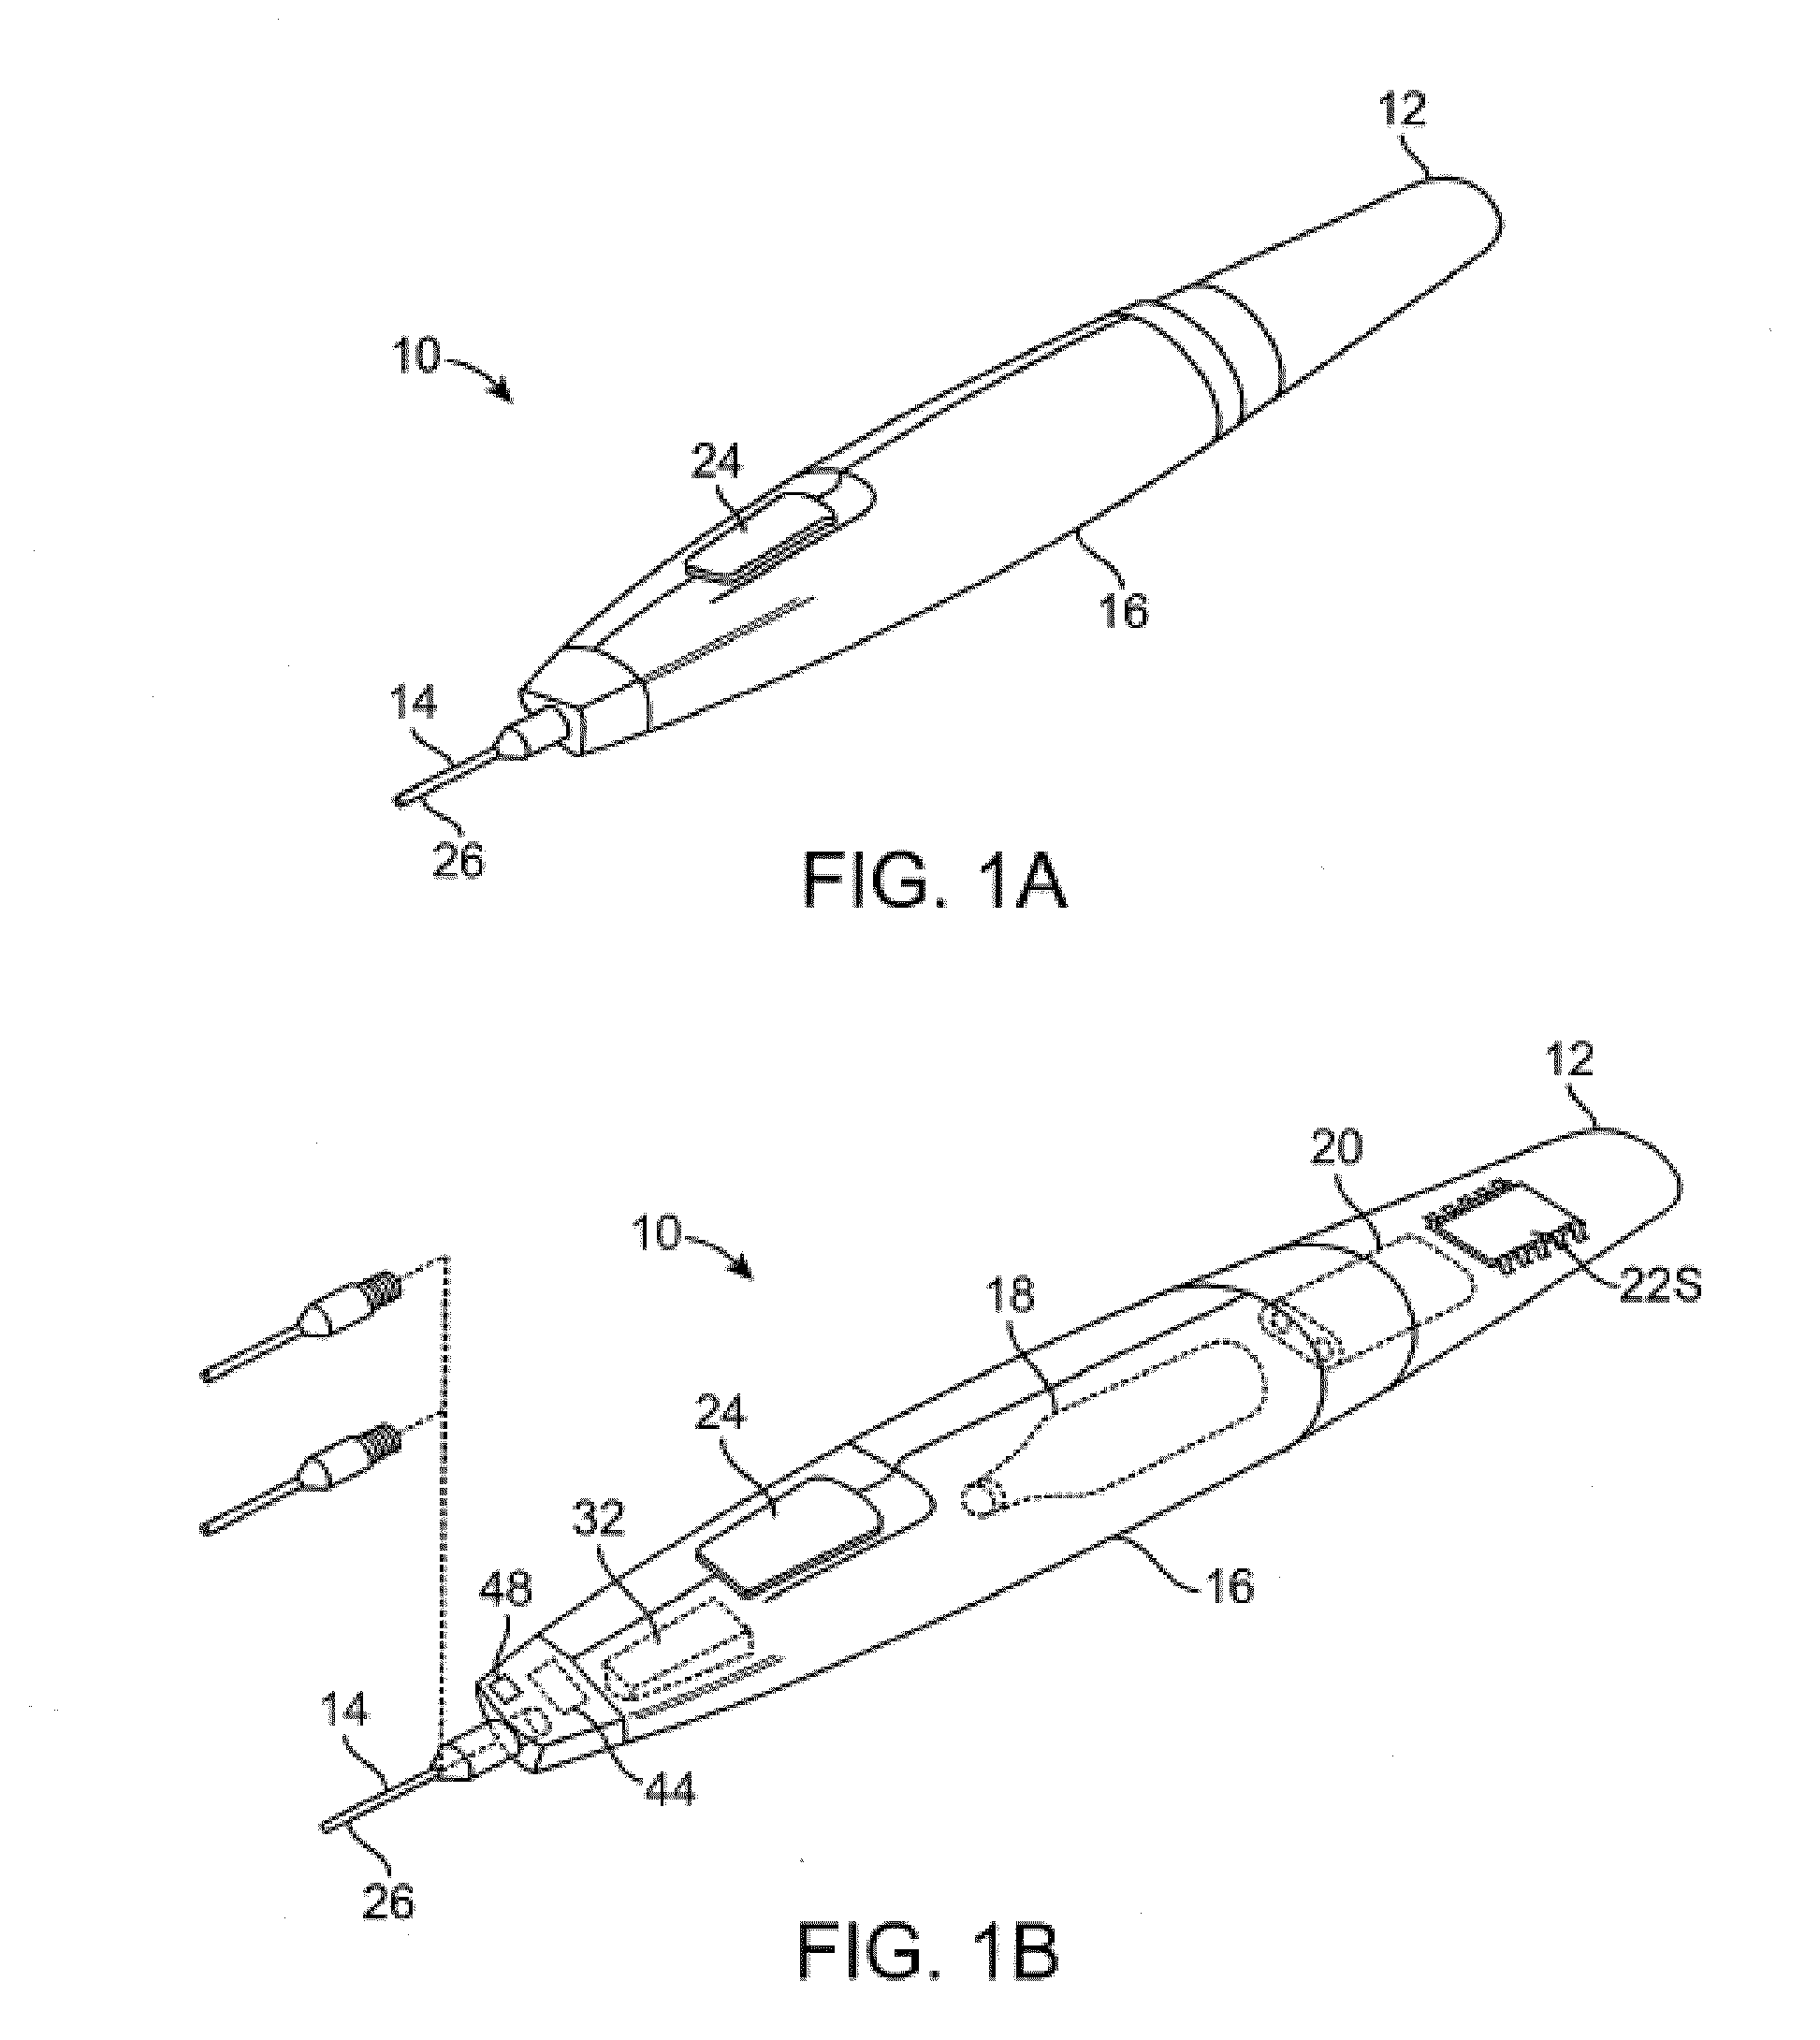 Methods and Systems for Treatment of Occipital Neuralgia